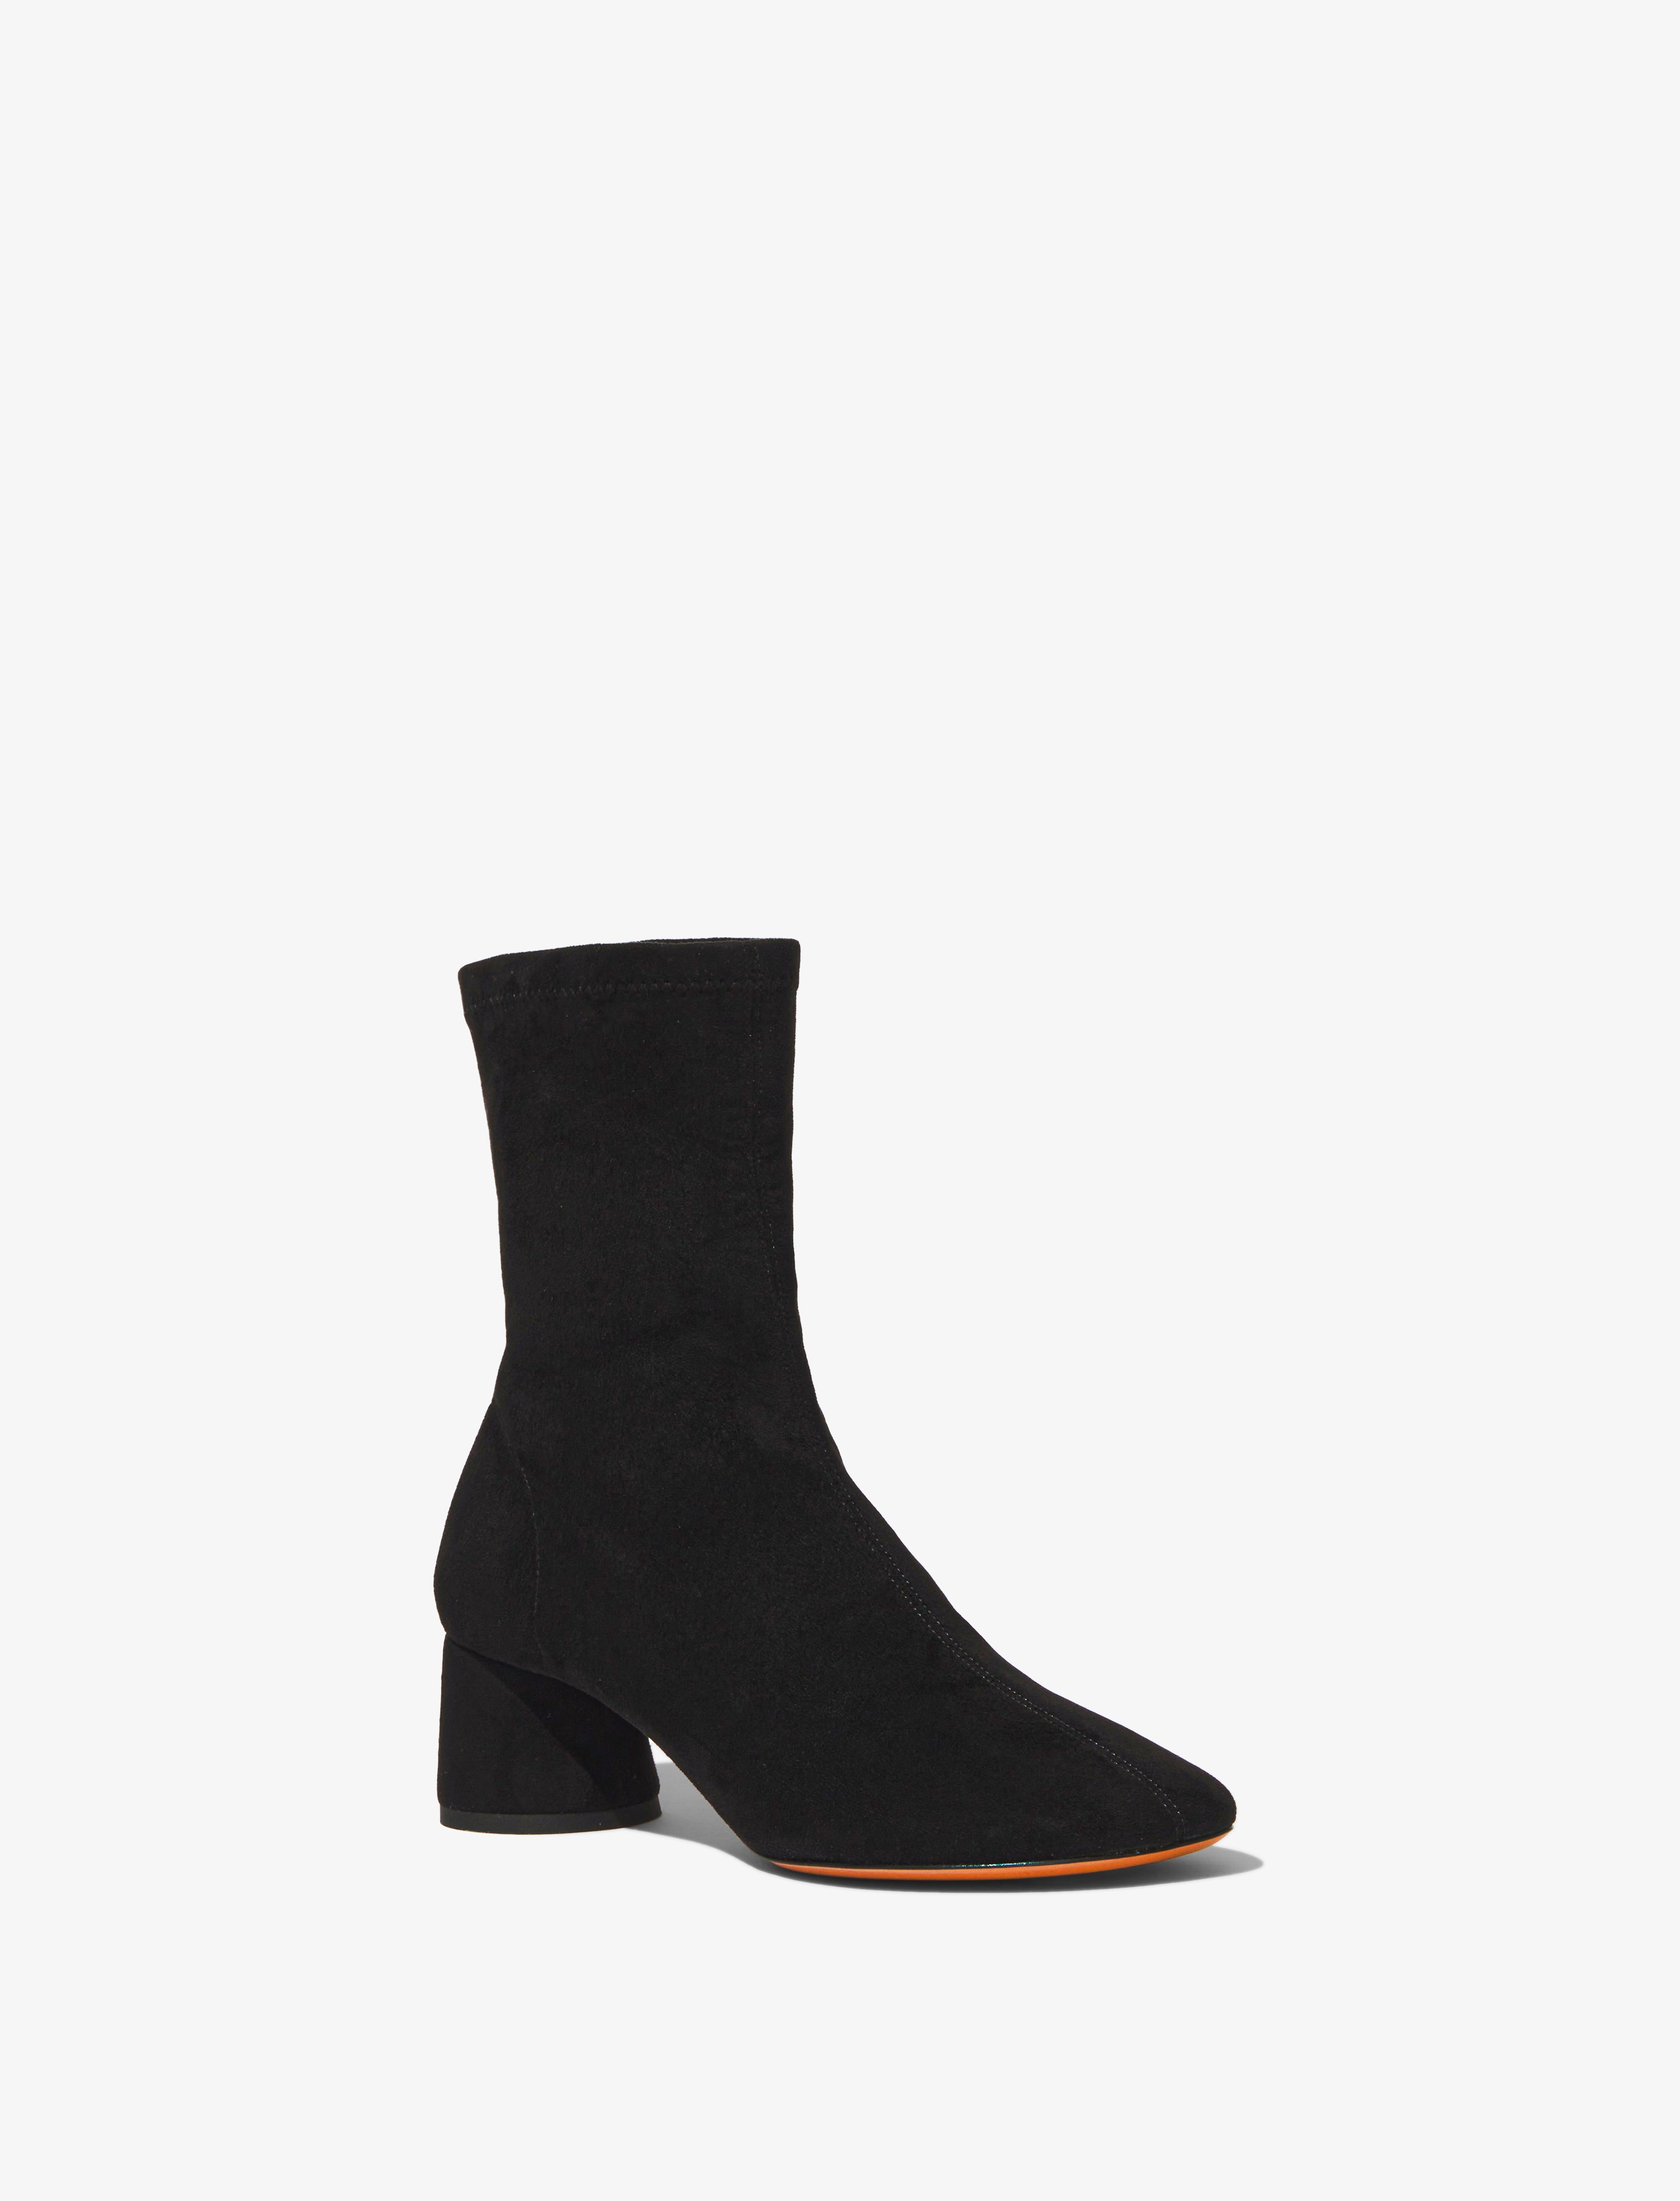 Glove Stretch Ankle Boots in Faux Suede - 2